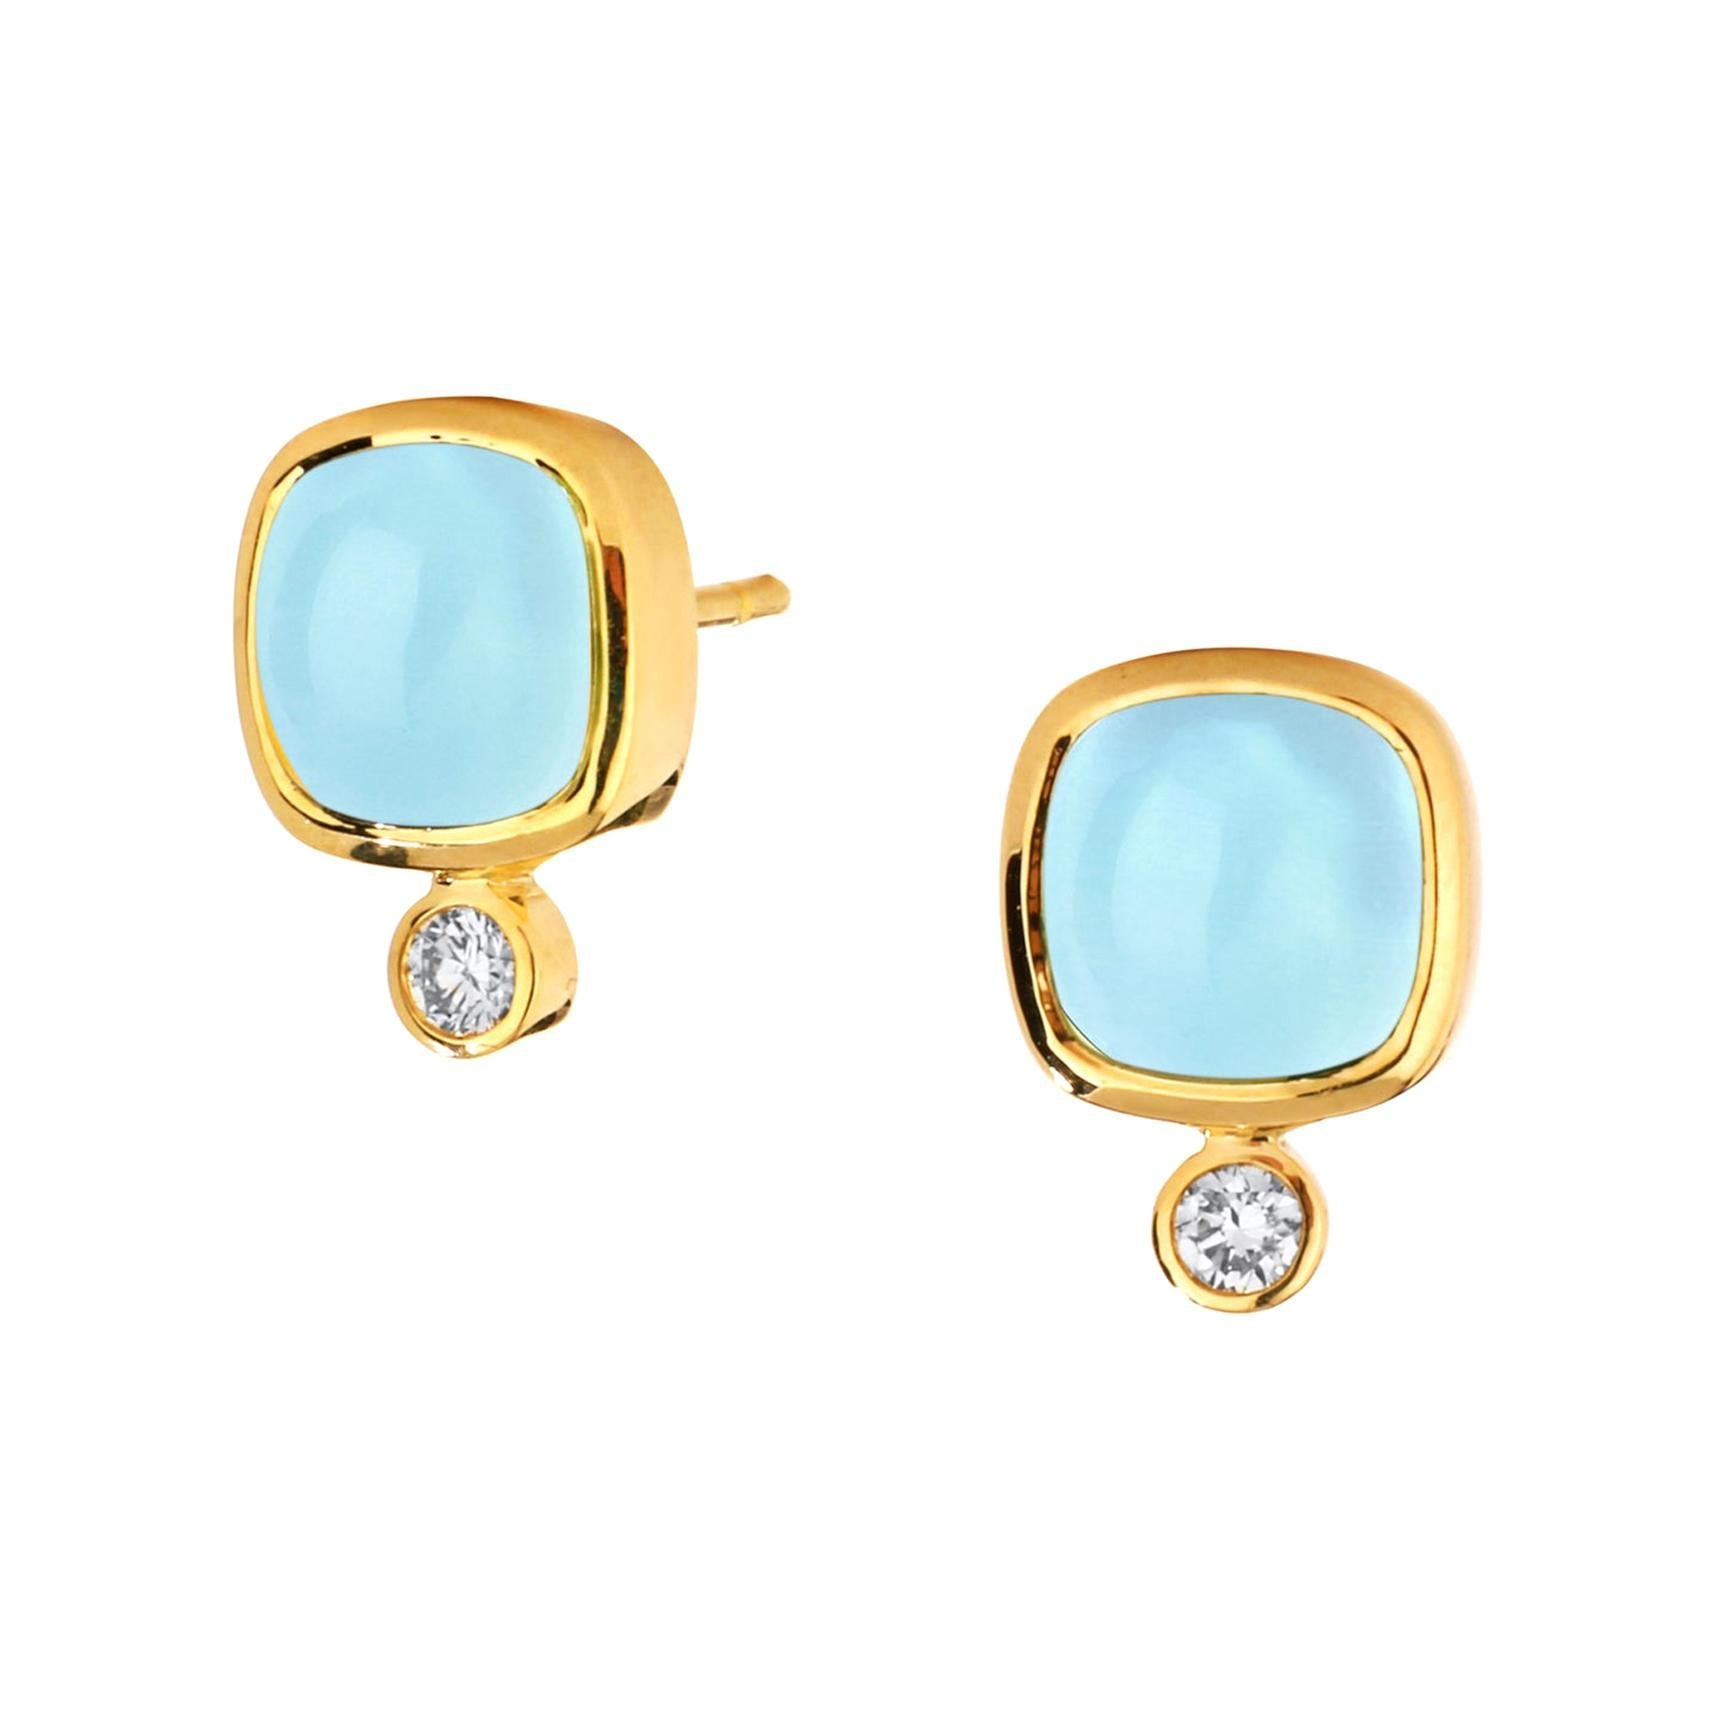 Syna Yellow Gold Aquamarine Sugarloaf Earrings with Diamonds